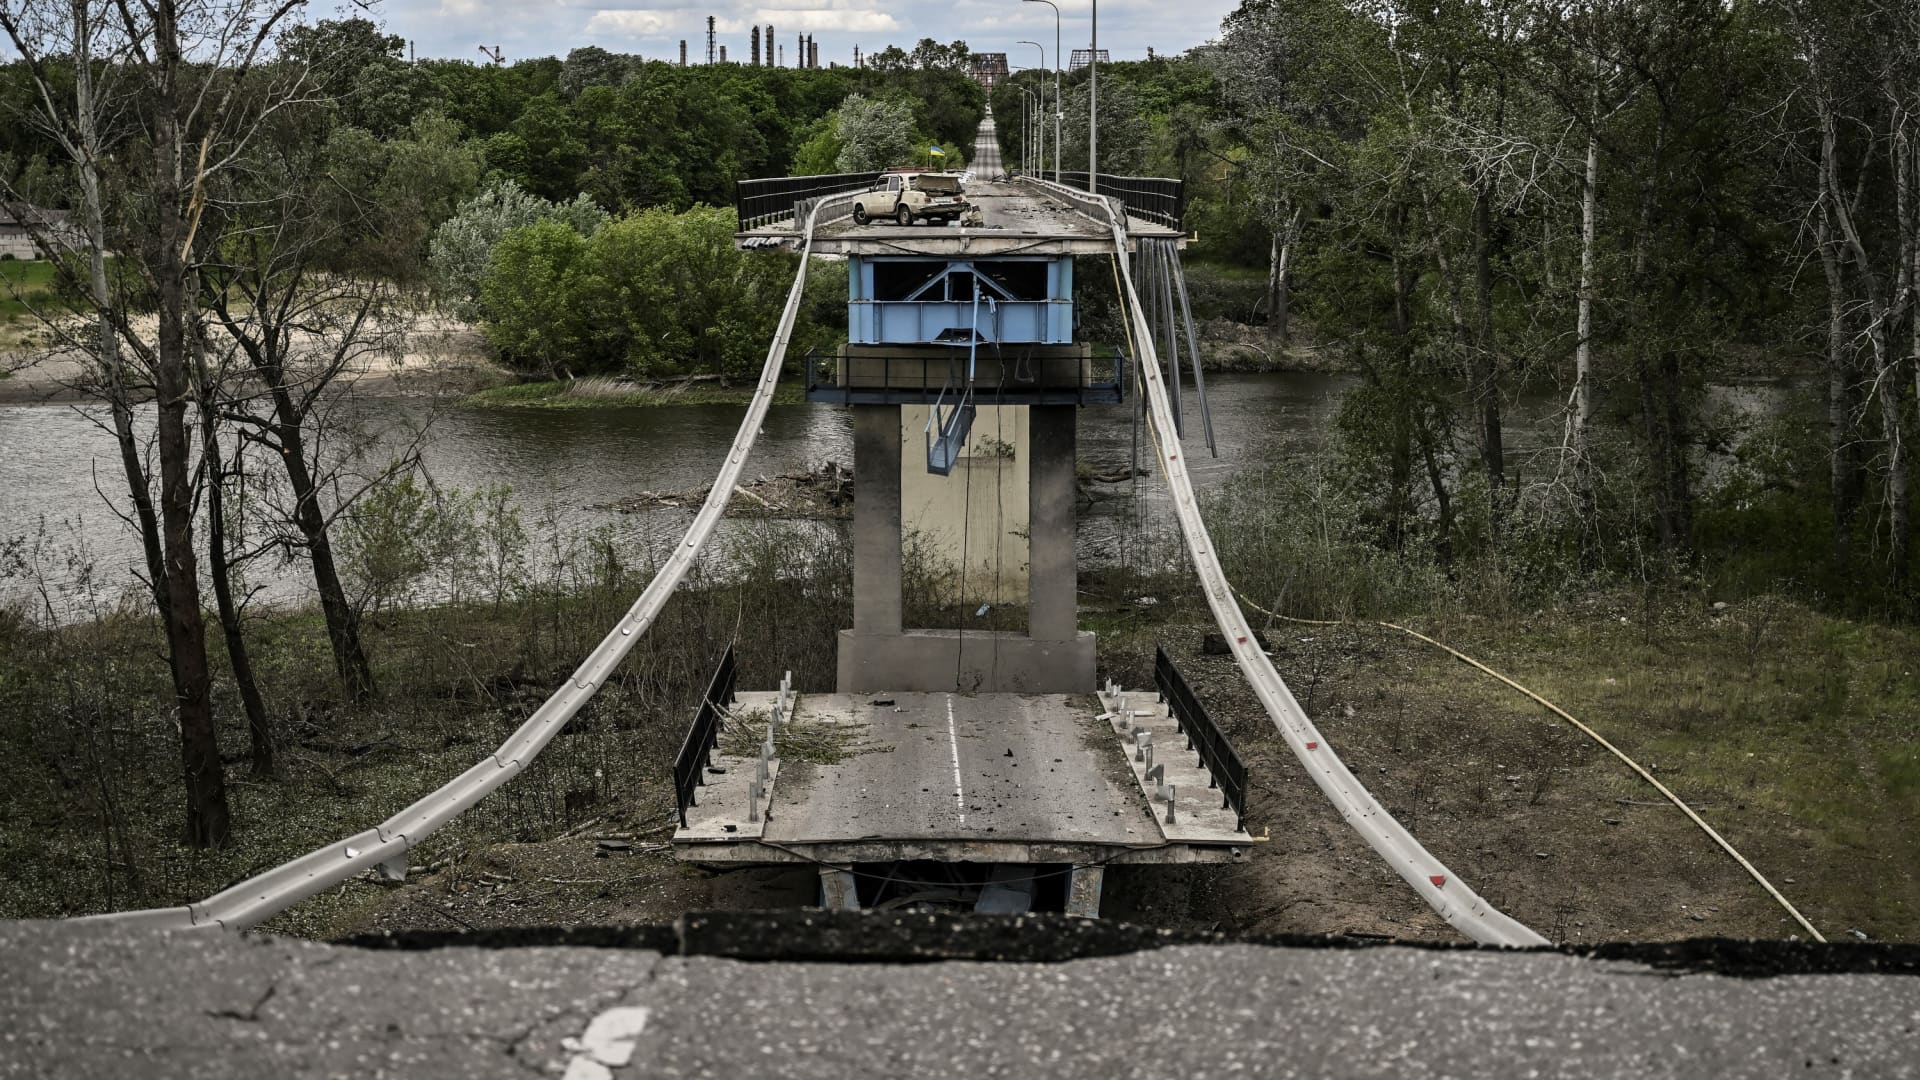 A picture taken on May 22, 2022, shows the destroyed bridge connecting the city of Lysychansk with the city of Severodonetsk in the eastern Ukranian region of Donbas, amid Russian invasion of Ukraine.